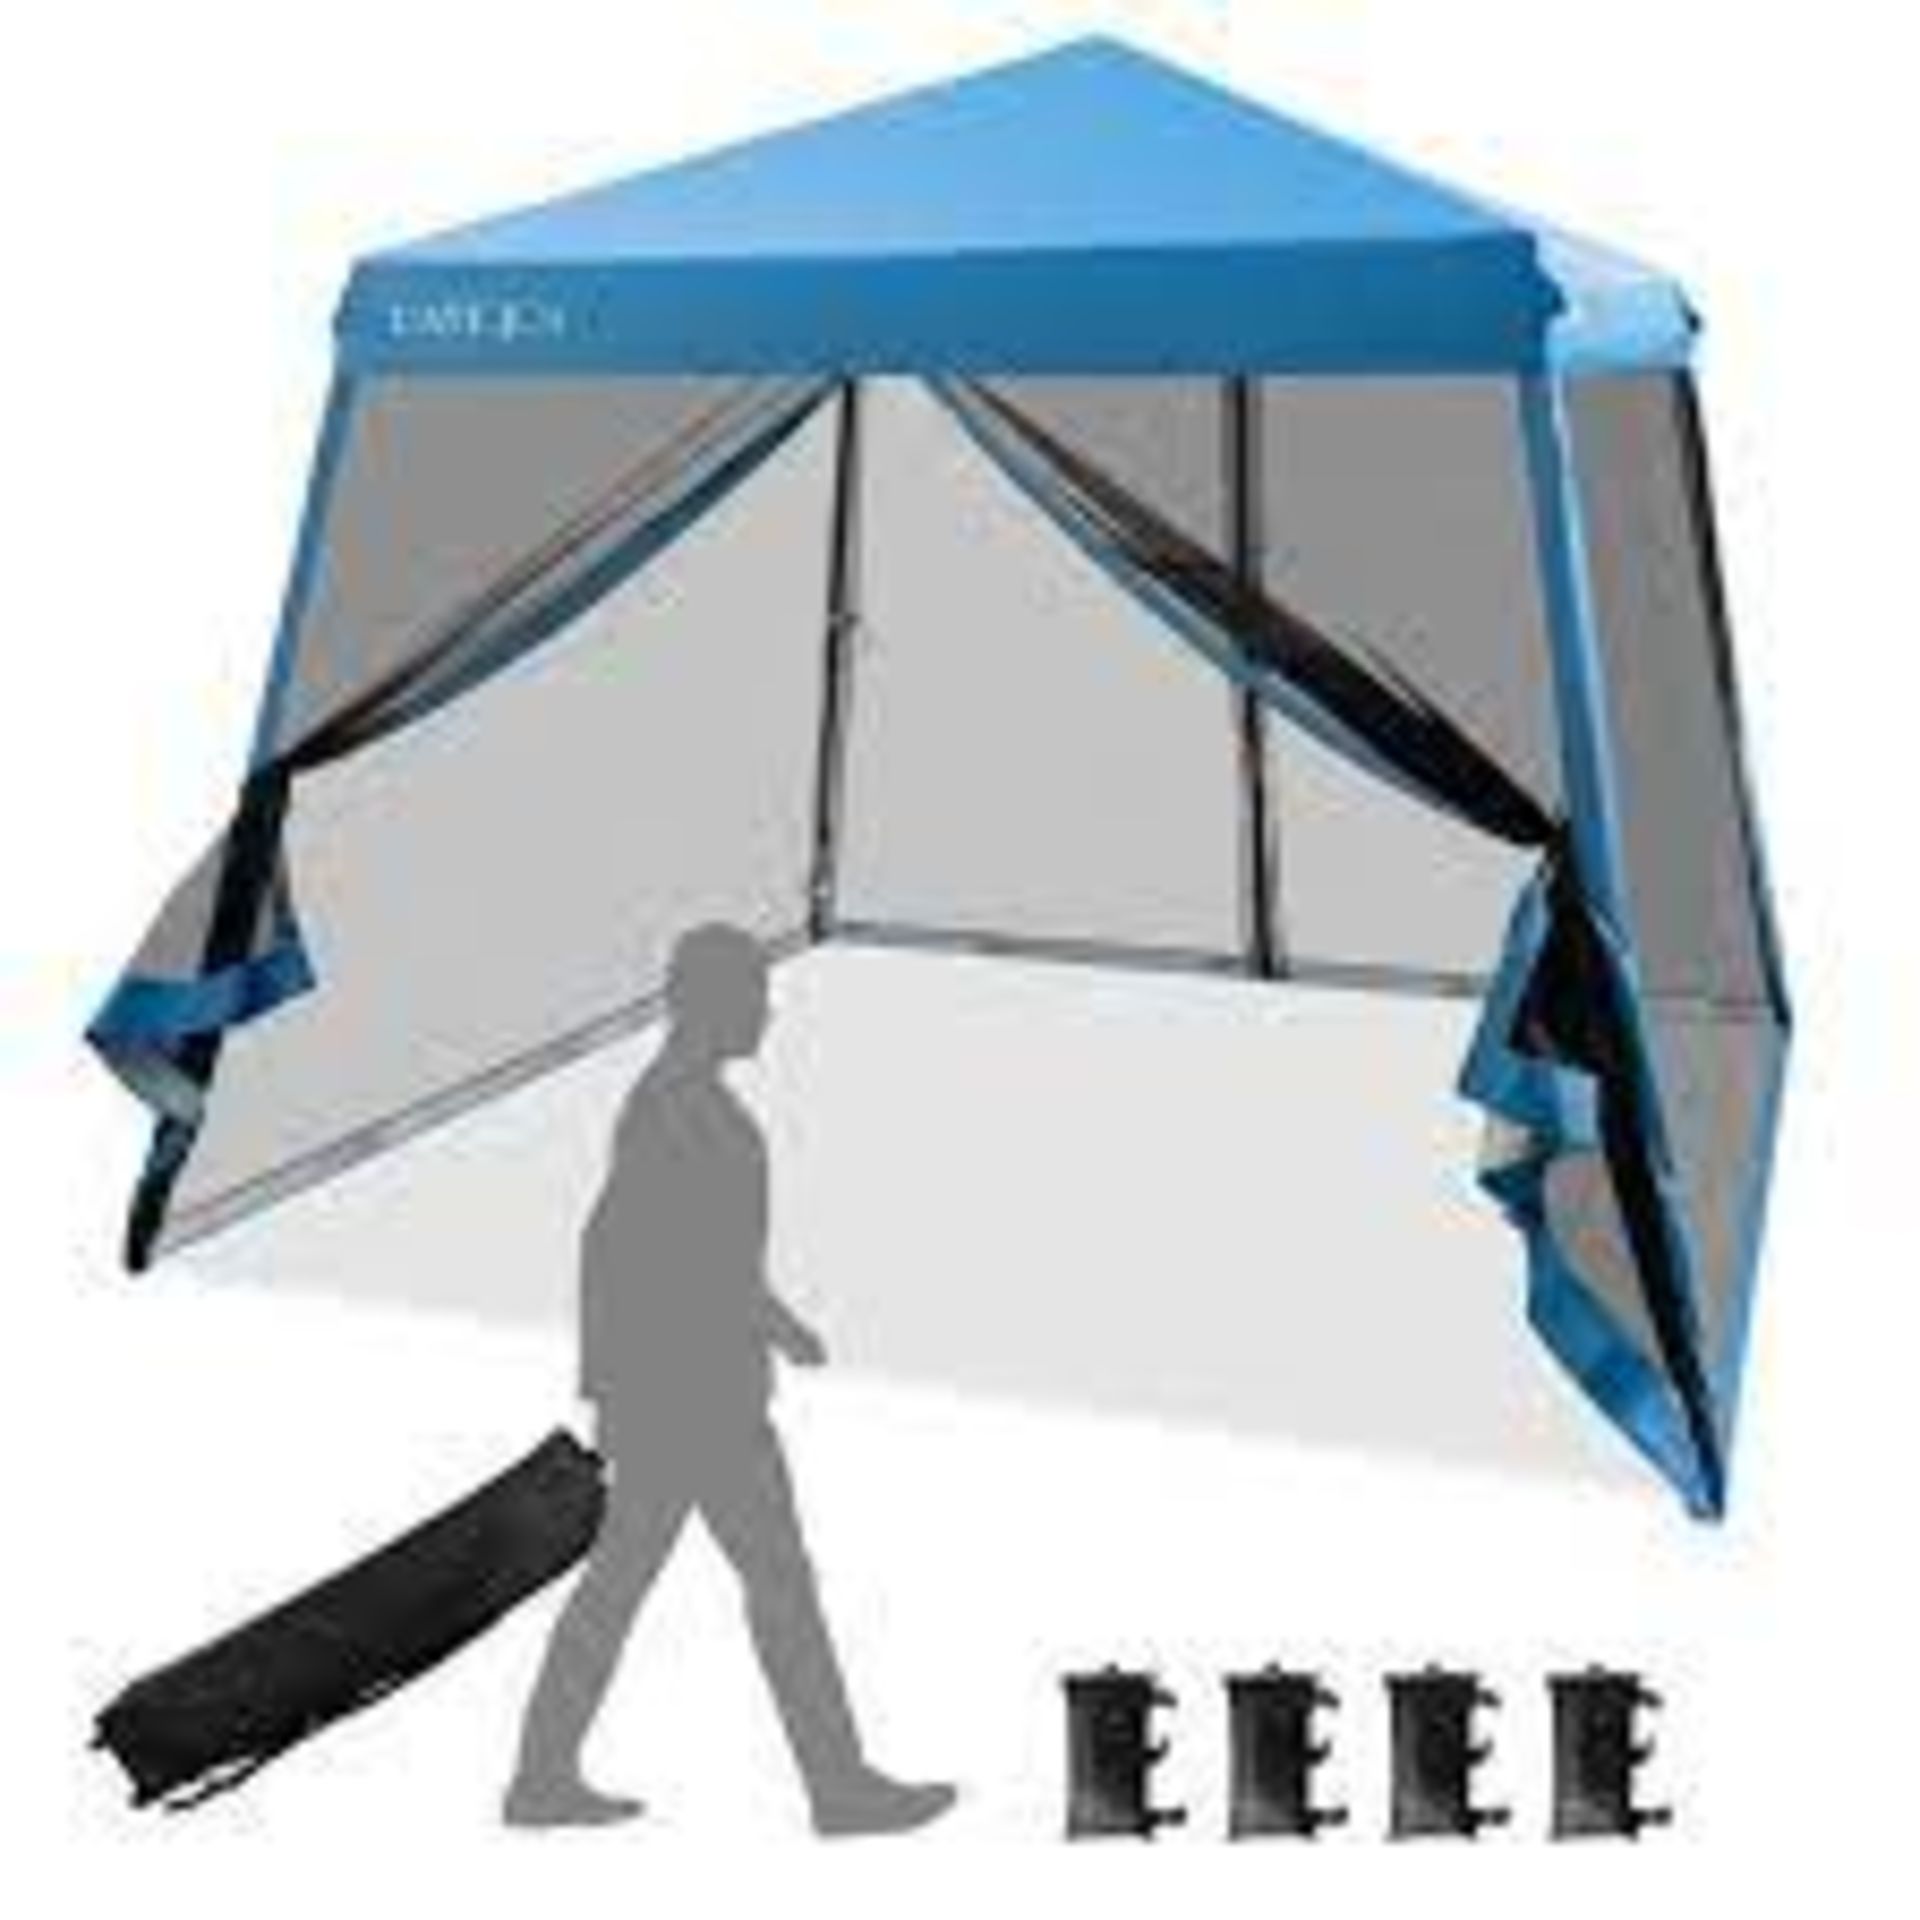 Instant Pop-up Height-Adjustable Canopy for Patio, Camp, Beach - ER54